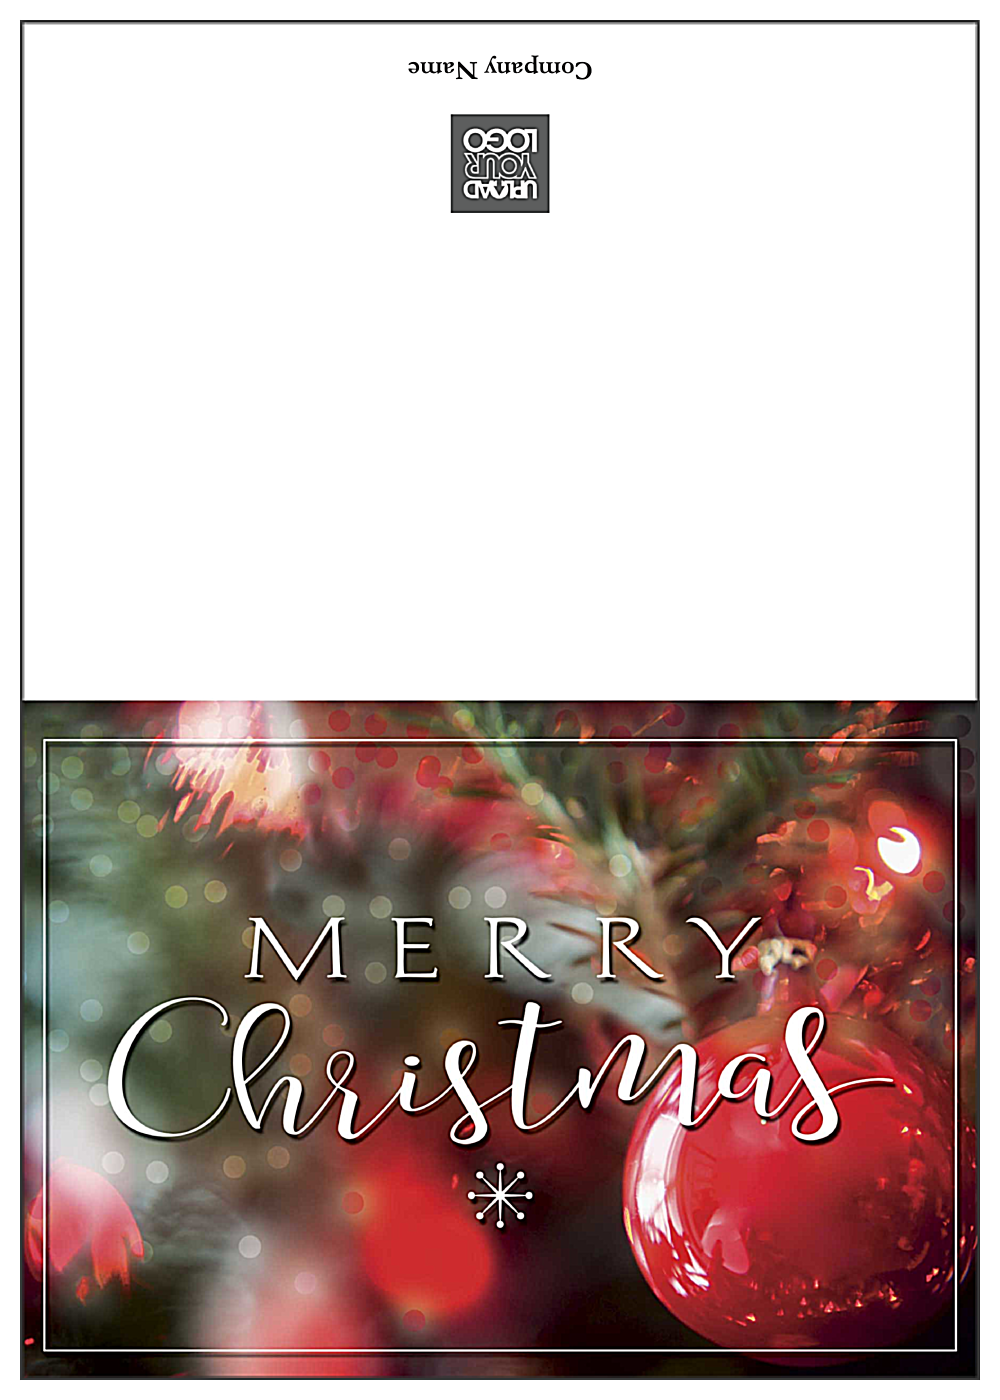 Merry Christmas Ornaments front - Greeting Cards Maker